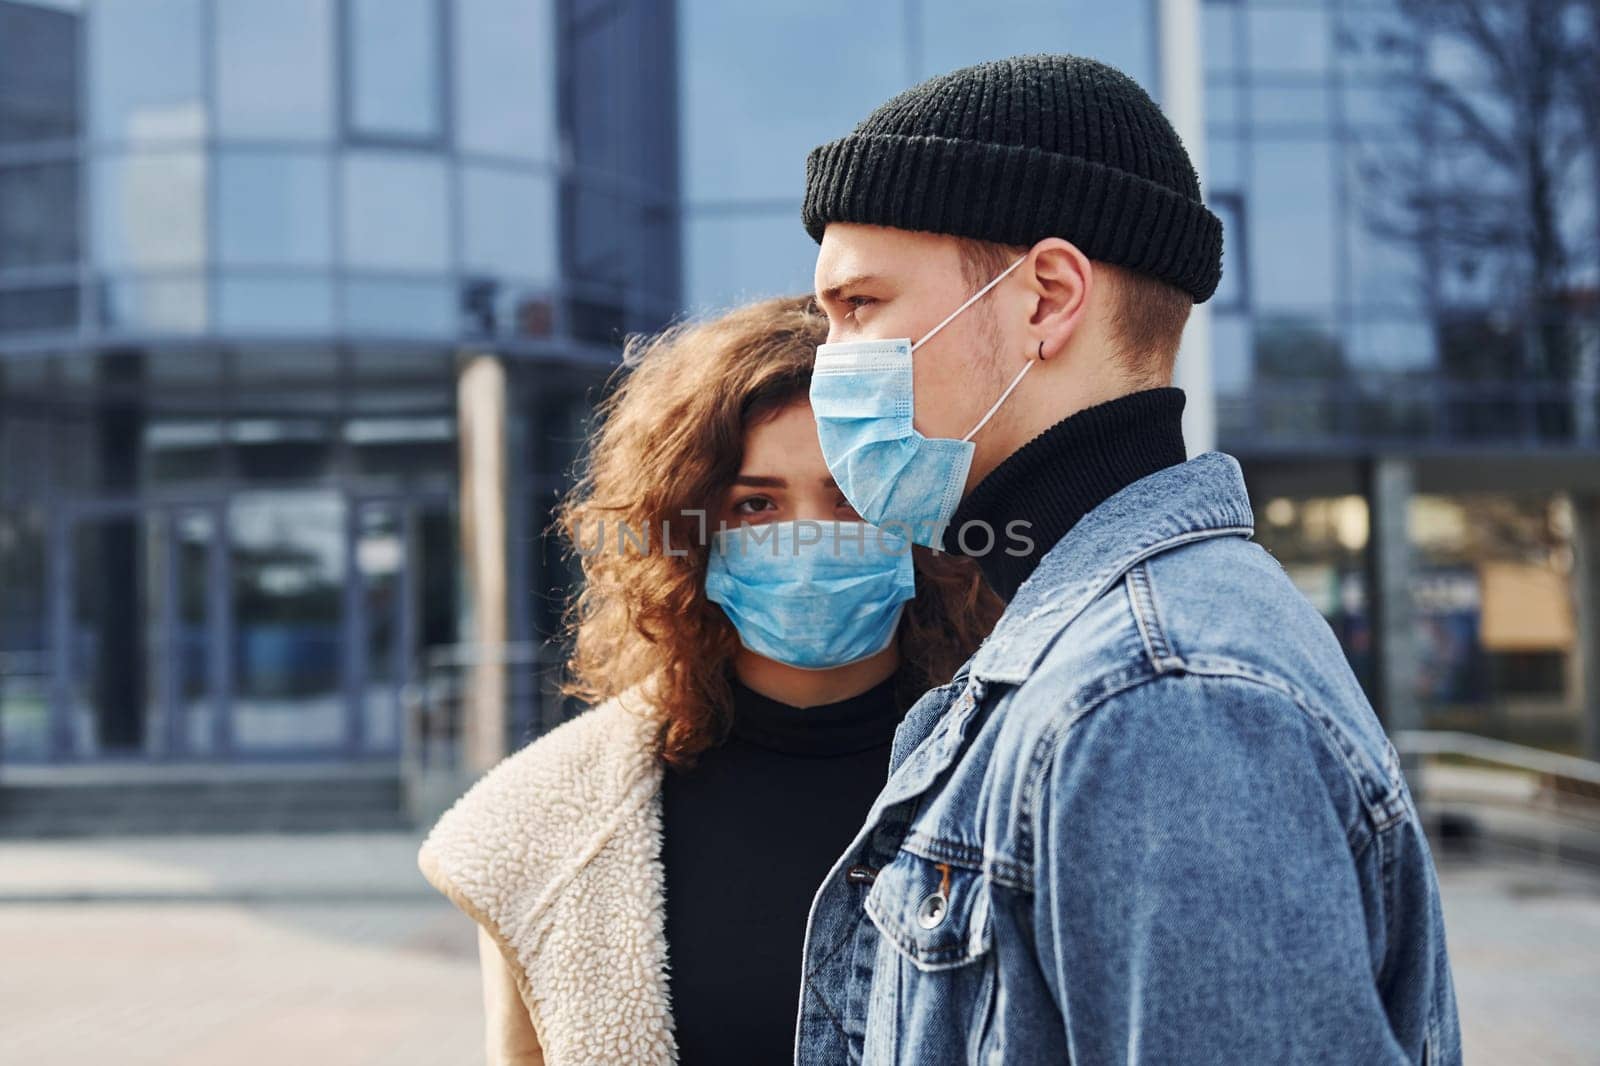 Couple in protective masks have a walk outdoors in the city near business building at quarantine time. Conception of coronavirus.